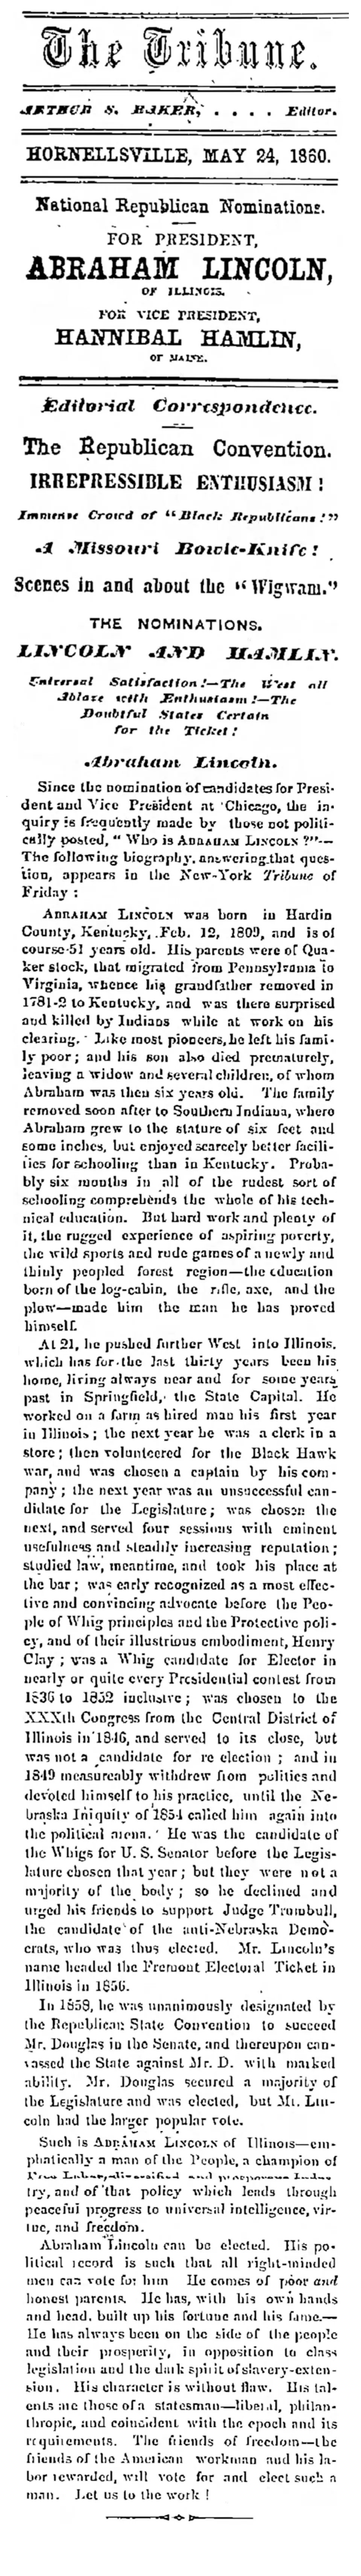 Newspaper clipping with header 'The Tribune' giving reasons Lincoln should be elected president.